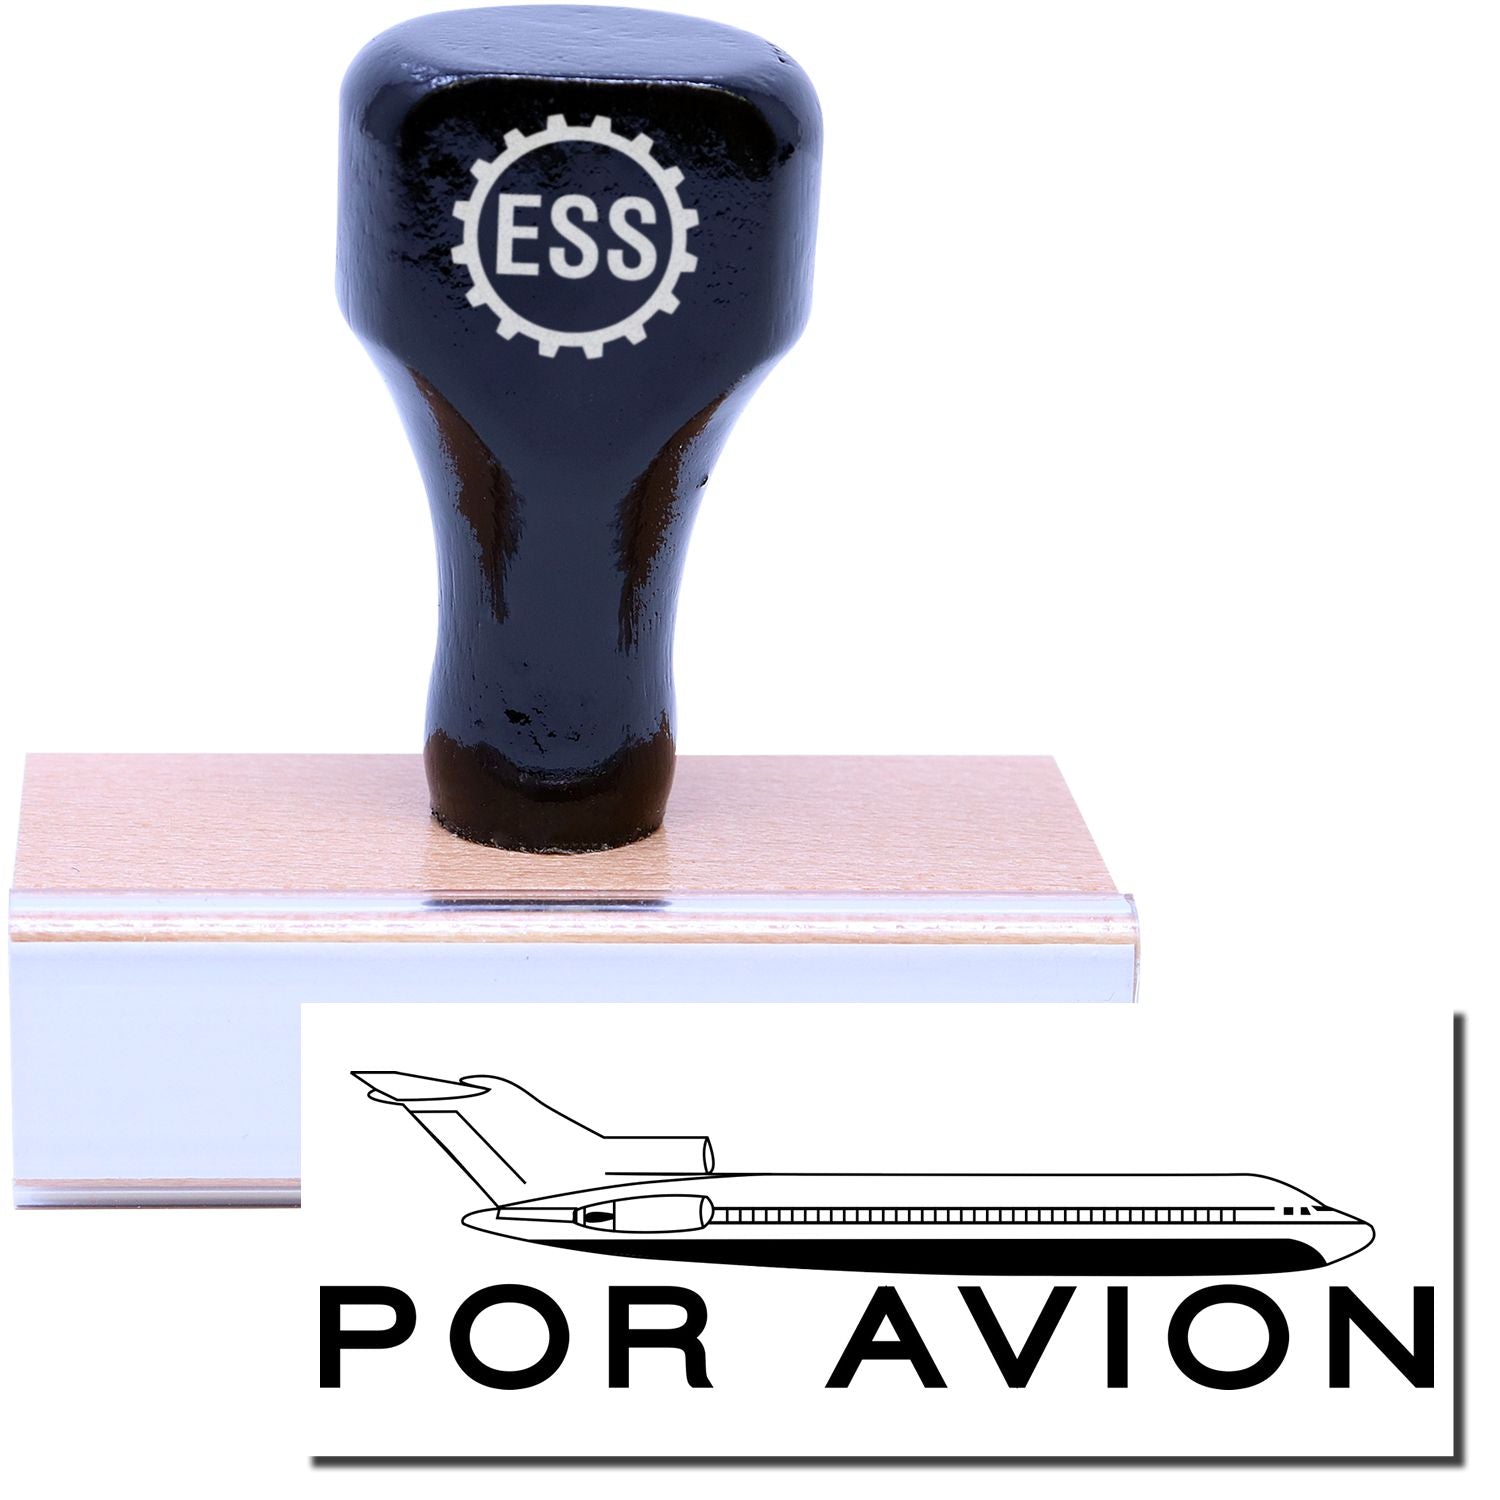 A stock office rubber stamp with a stamped image showing how the text "POR AVION" in a large bold font with an airplane icon above the text is displayed after stamping.